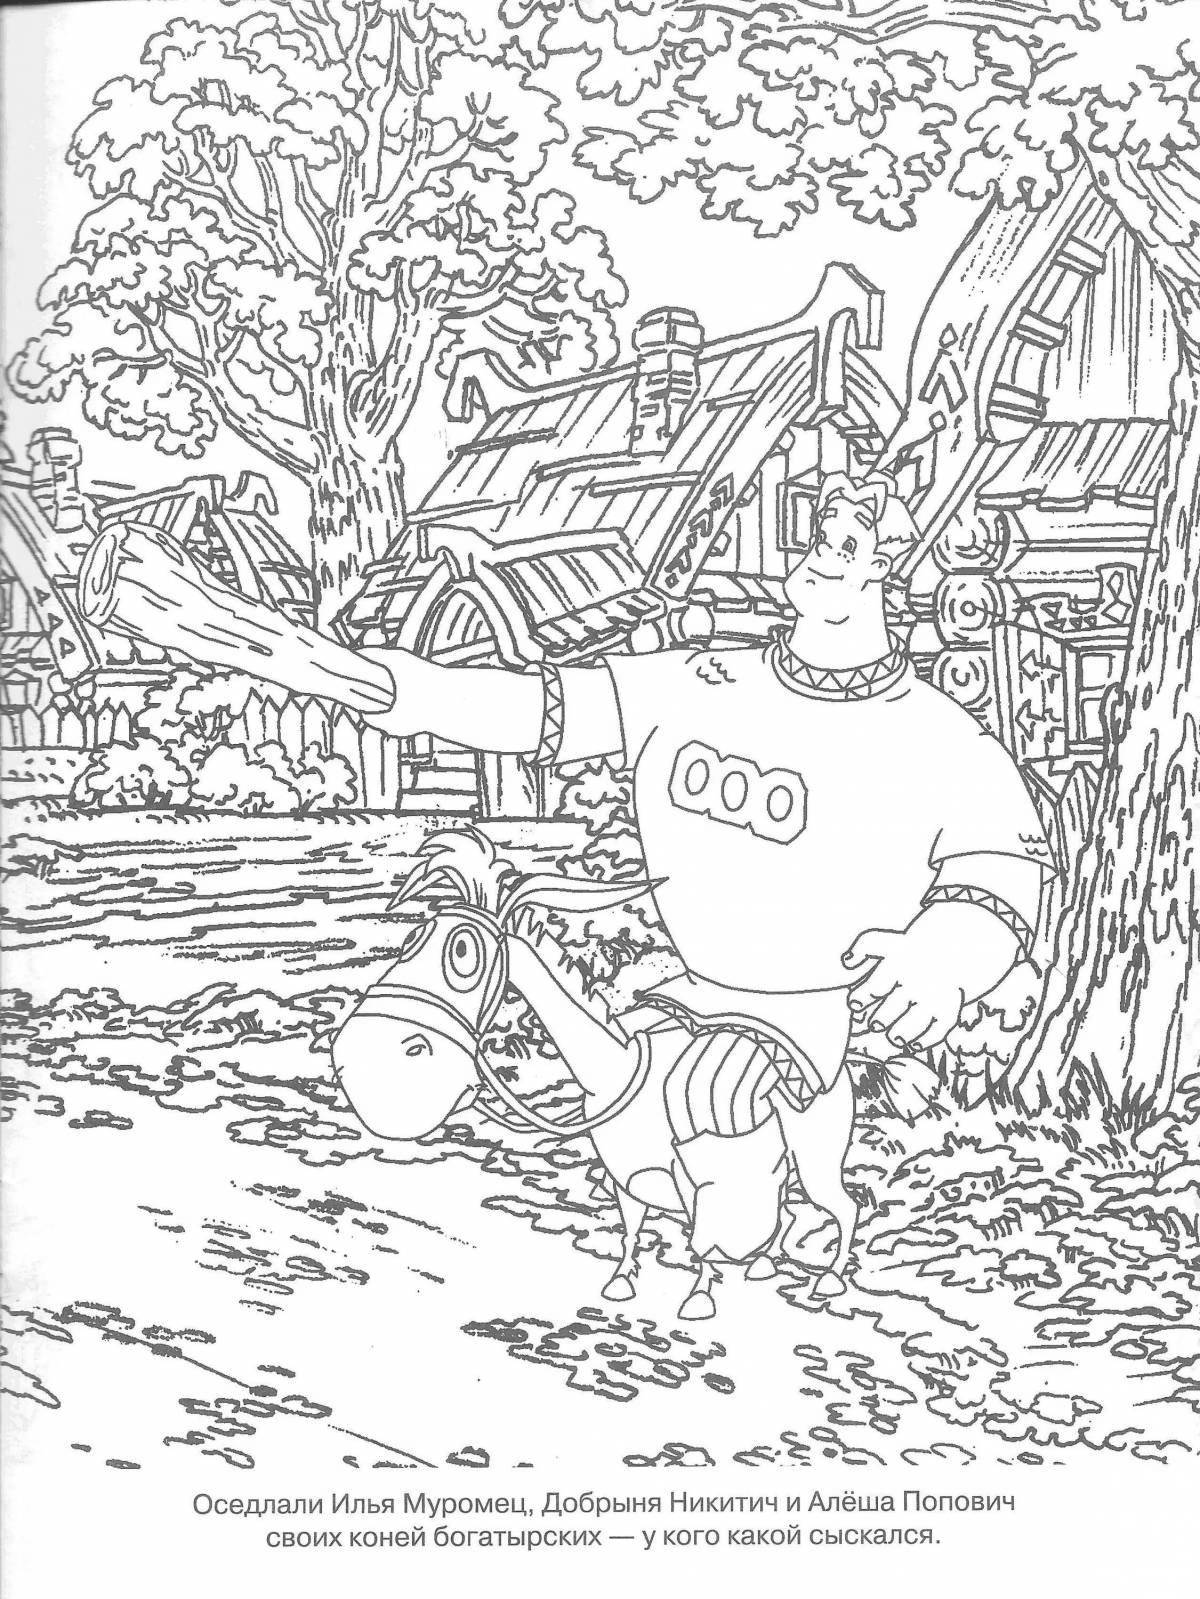 Impressive coloring page 3 heroes game